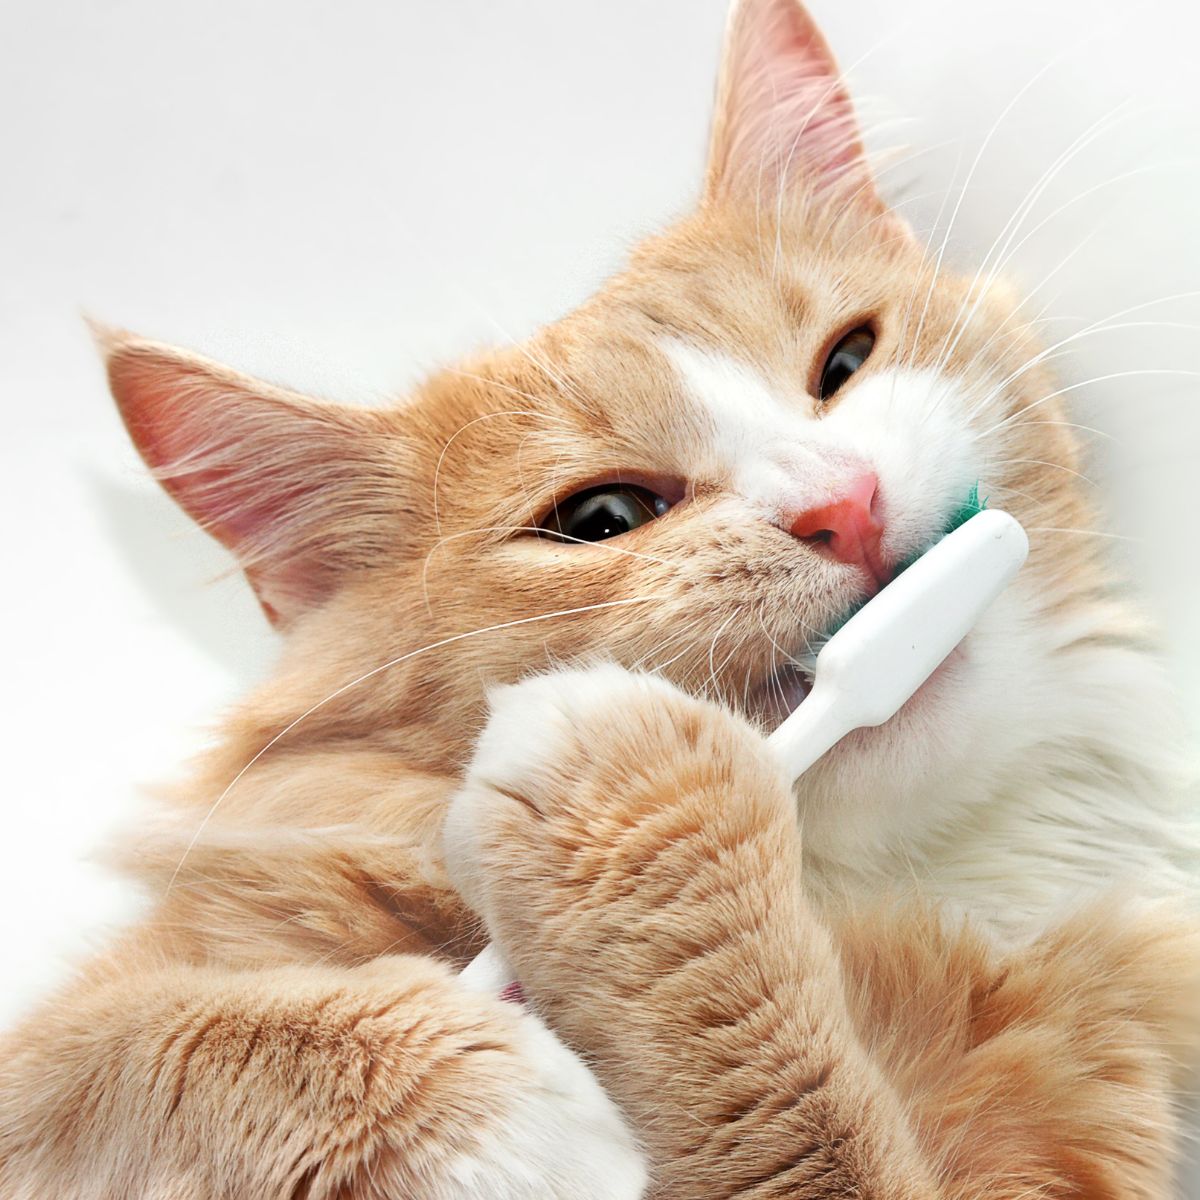 cat chewing on toothbrush<br />
